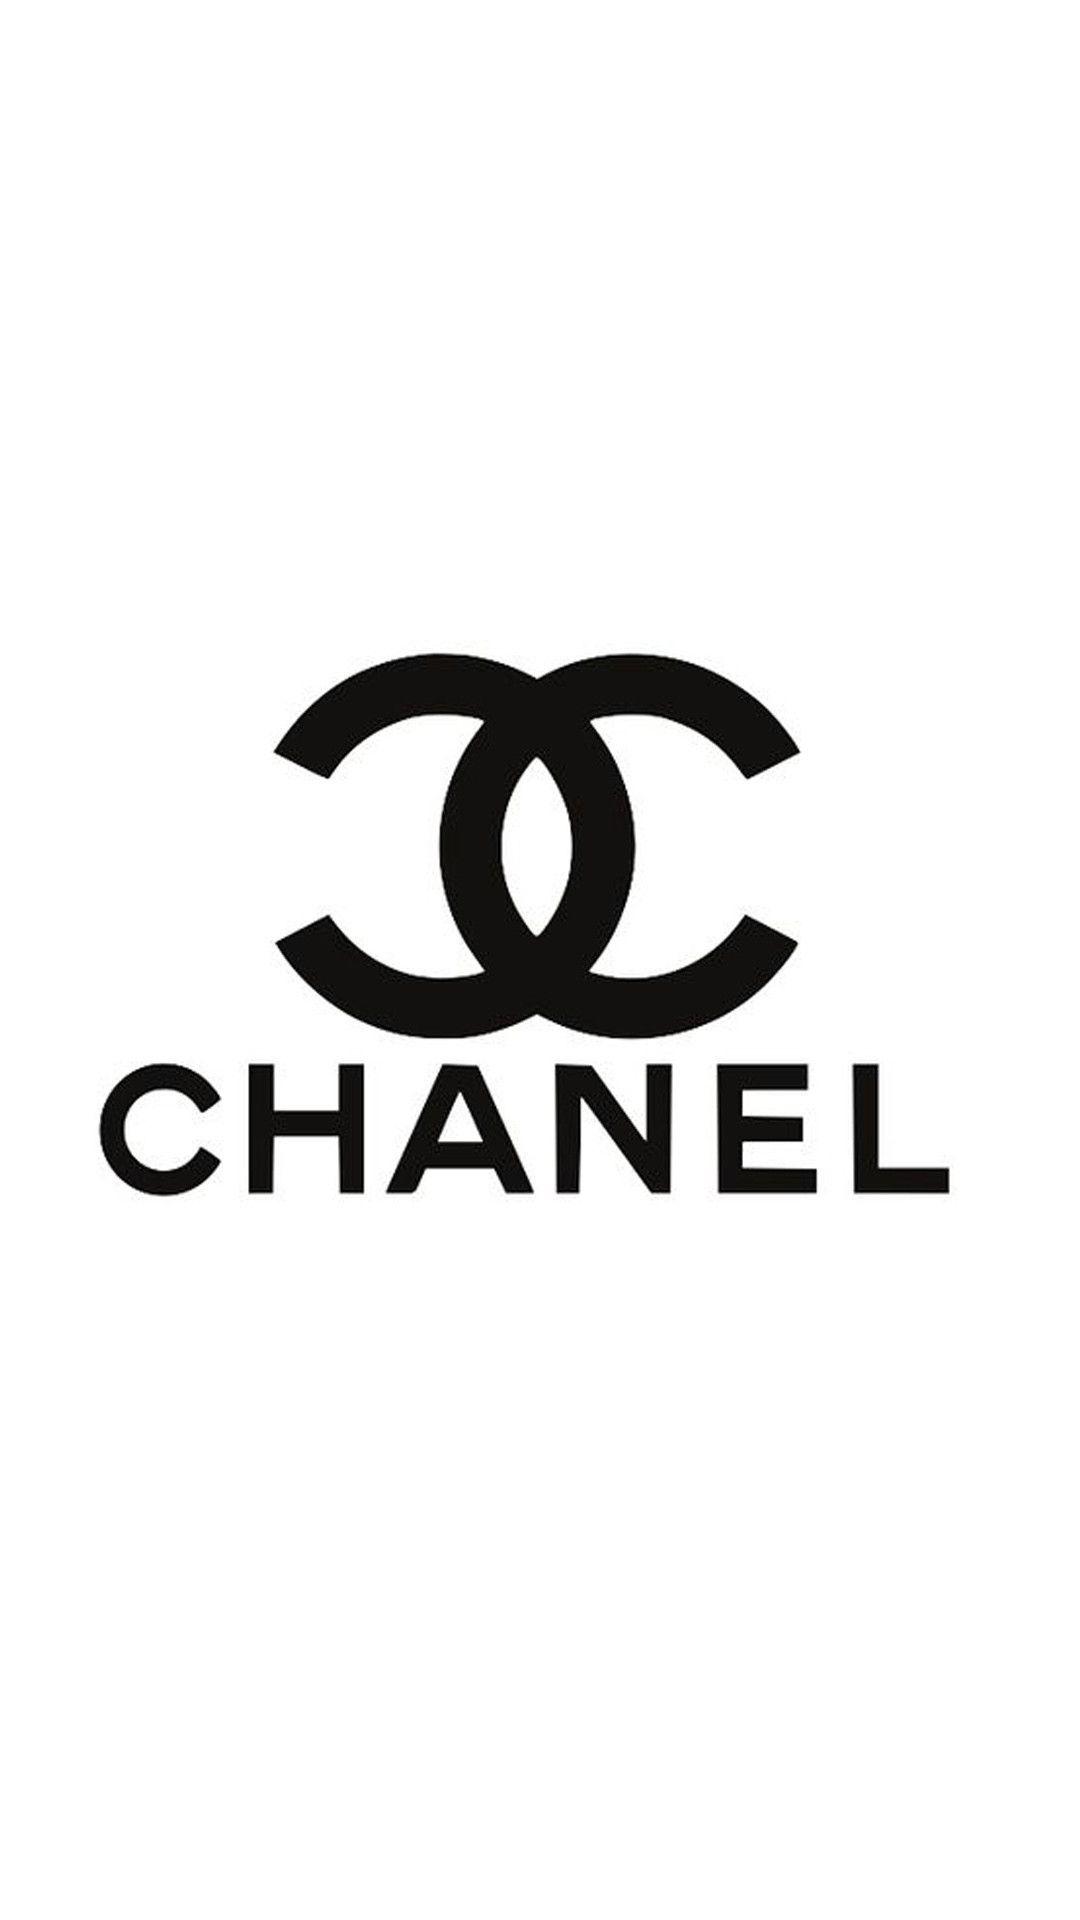 background chanel and wallpaper image  Chanel background Chanel  wallpapers Iphone wallpaper girly